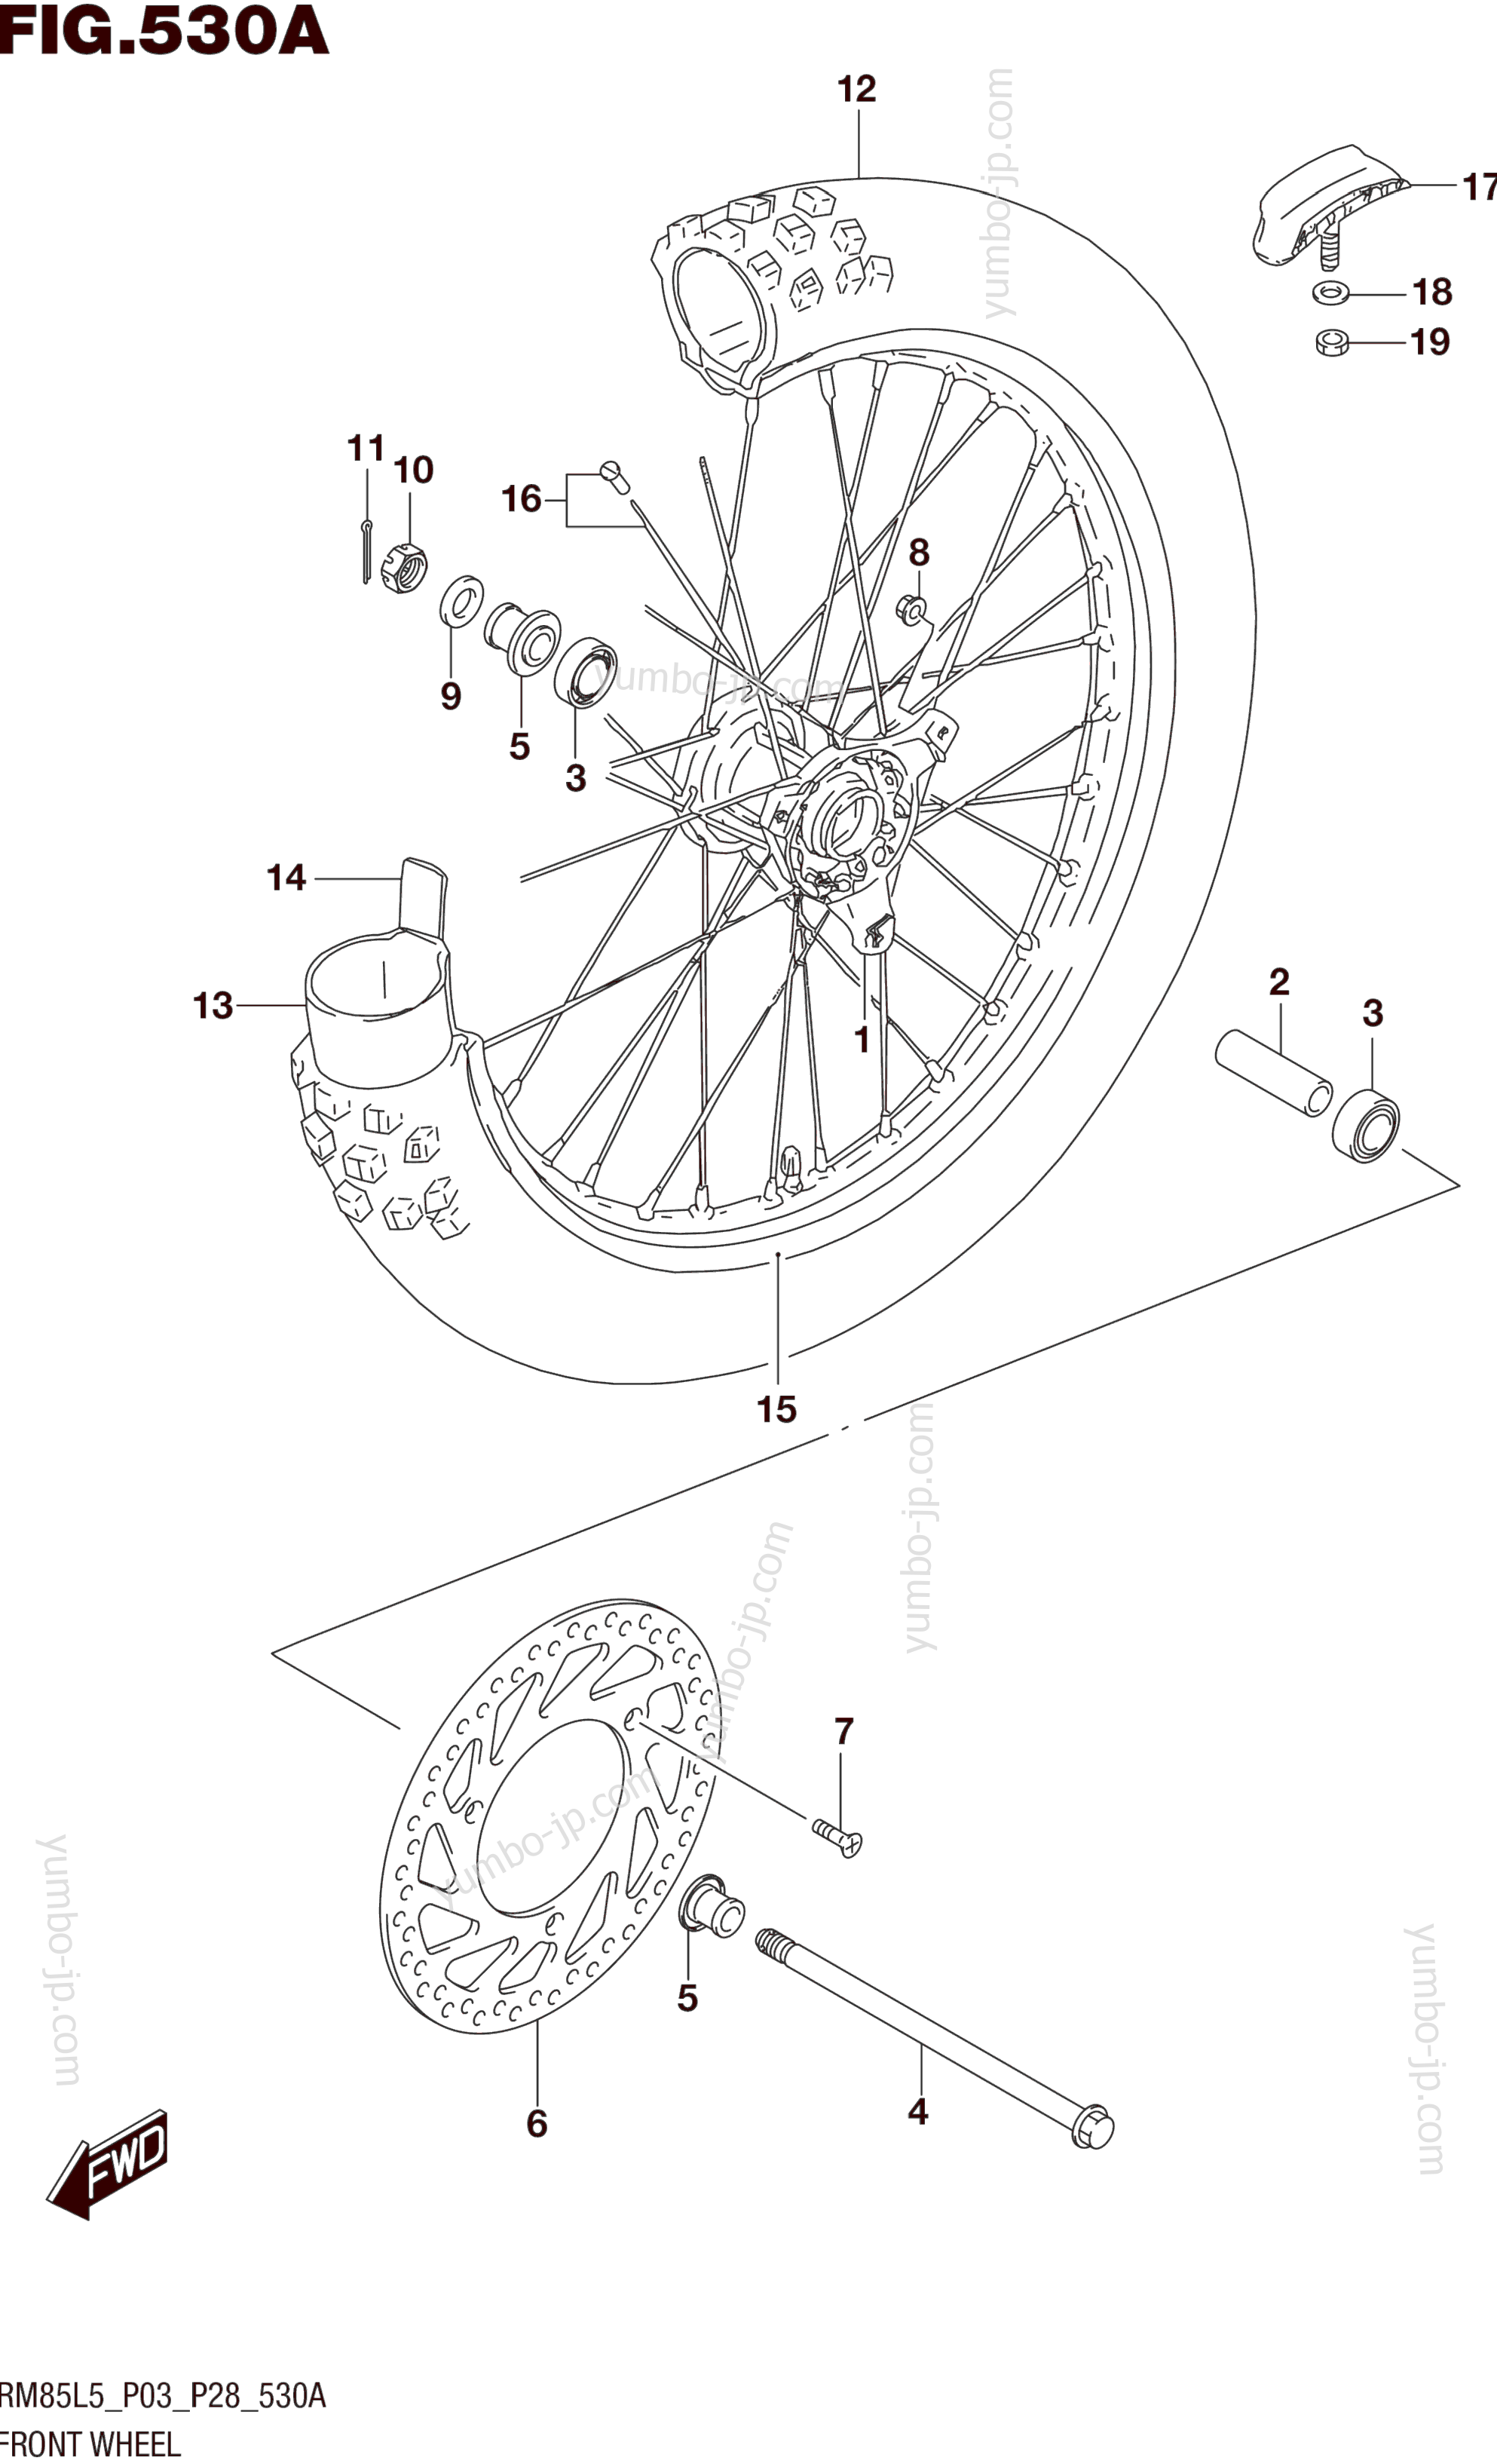 FRONT WHEEL (RM85L5 P03) for motorcycles SUZUKI RM85 2015 year